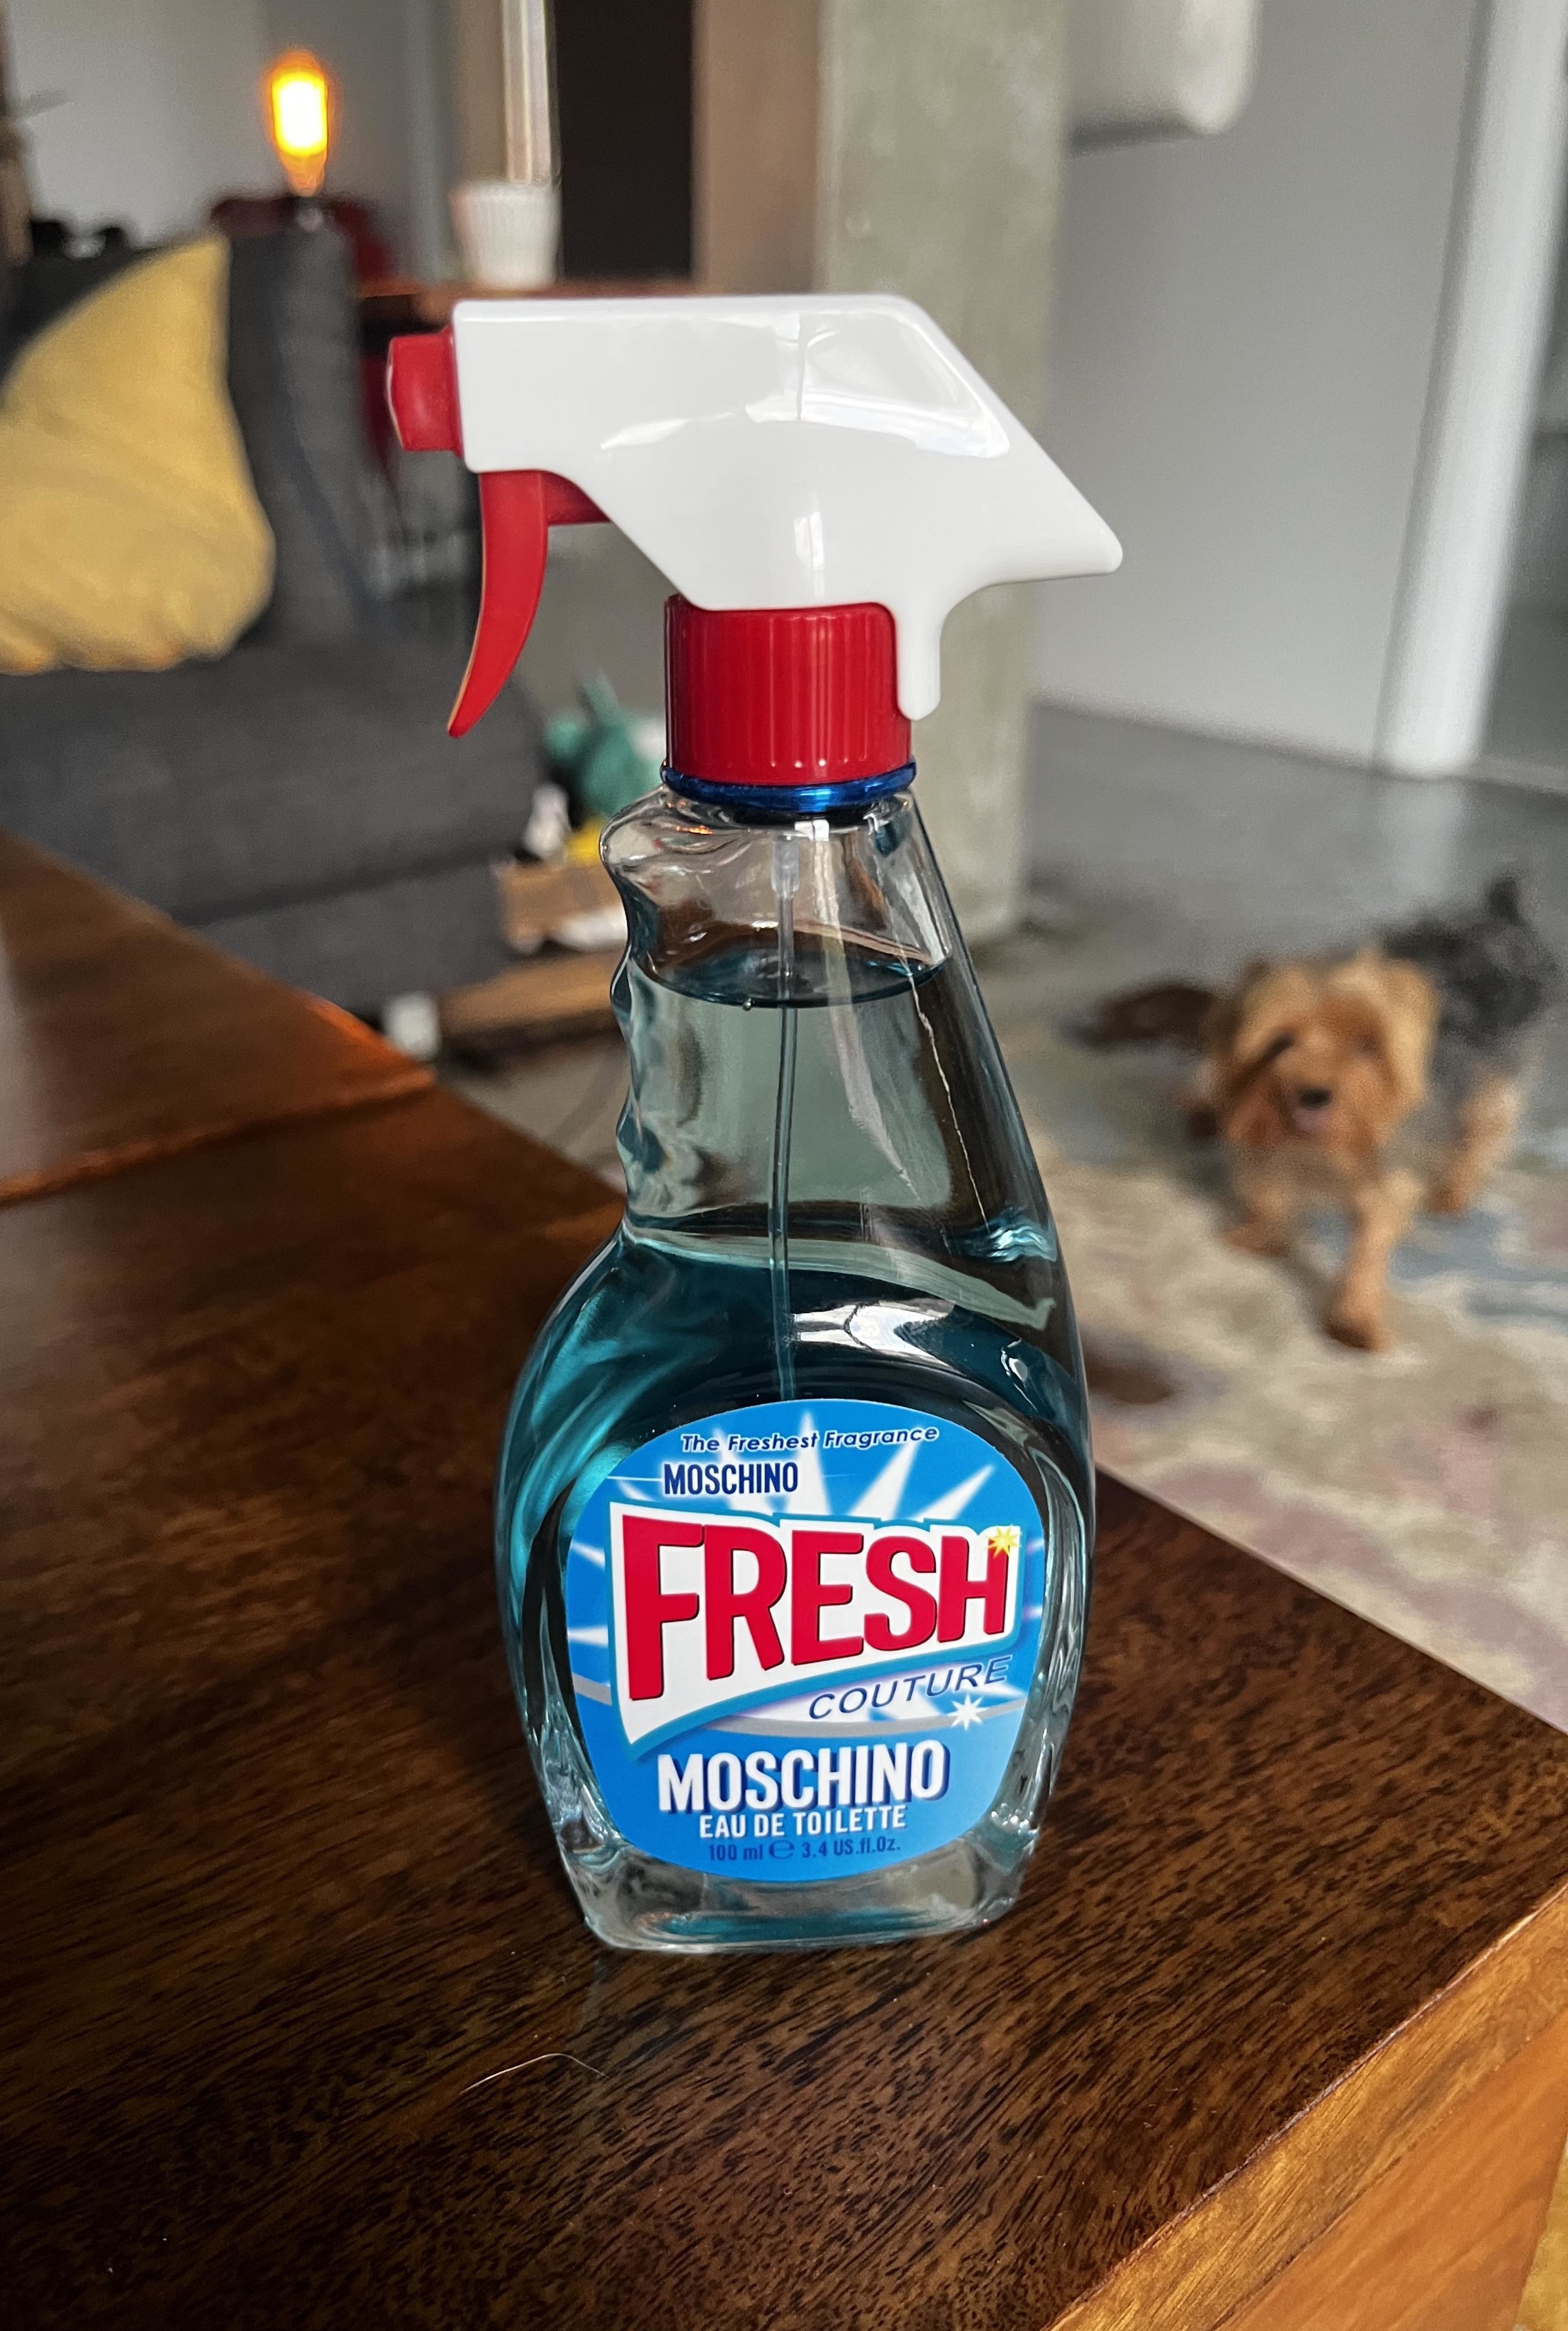 a perfume bottle that looks like glass cleaner